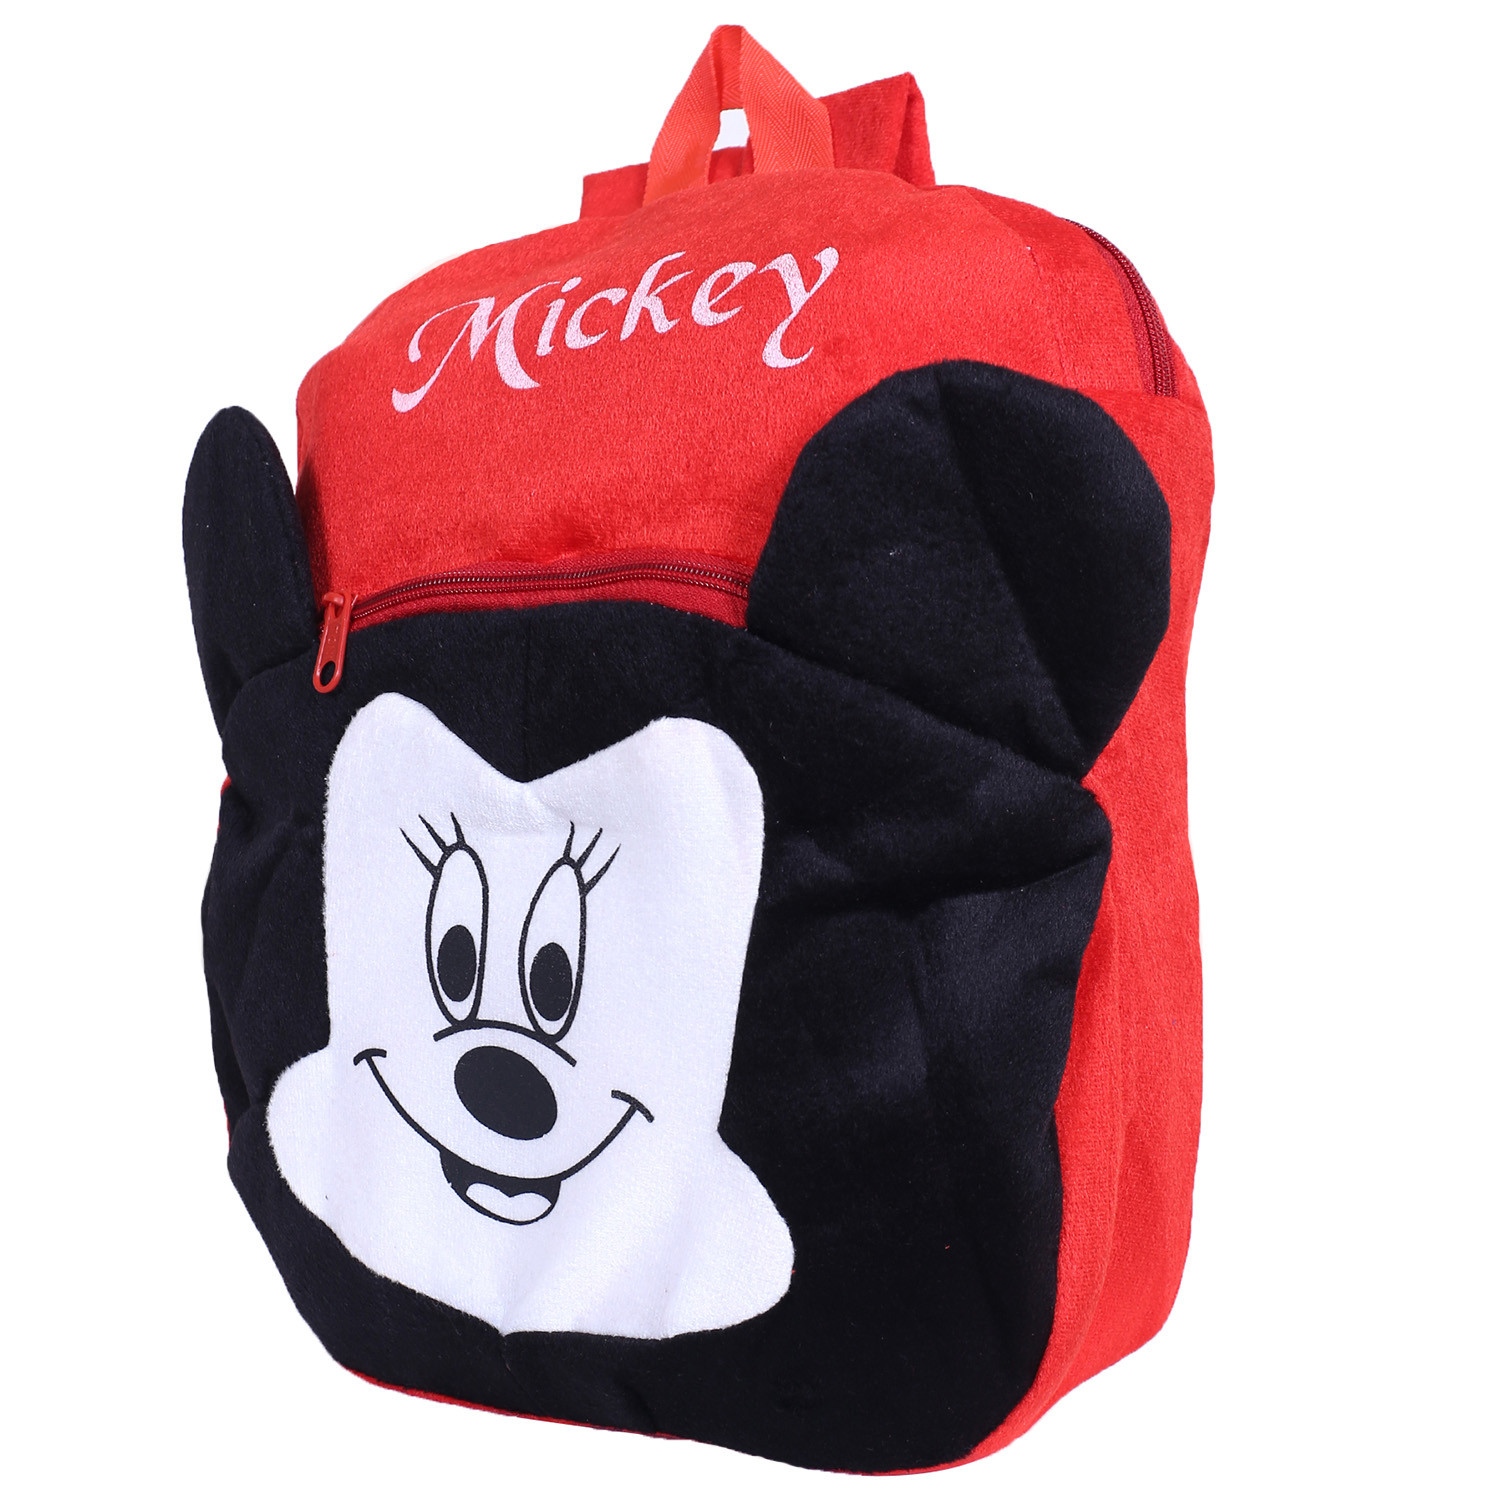 Kuber Industries Disney Mickey Plush Backpack|2 Compartment Velvet School Bag|Lower Side Mickey Face Haversack For Travel,School with Zipper (Red)